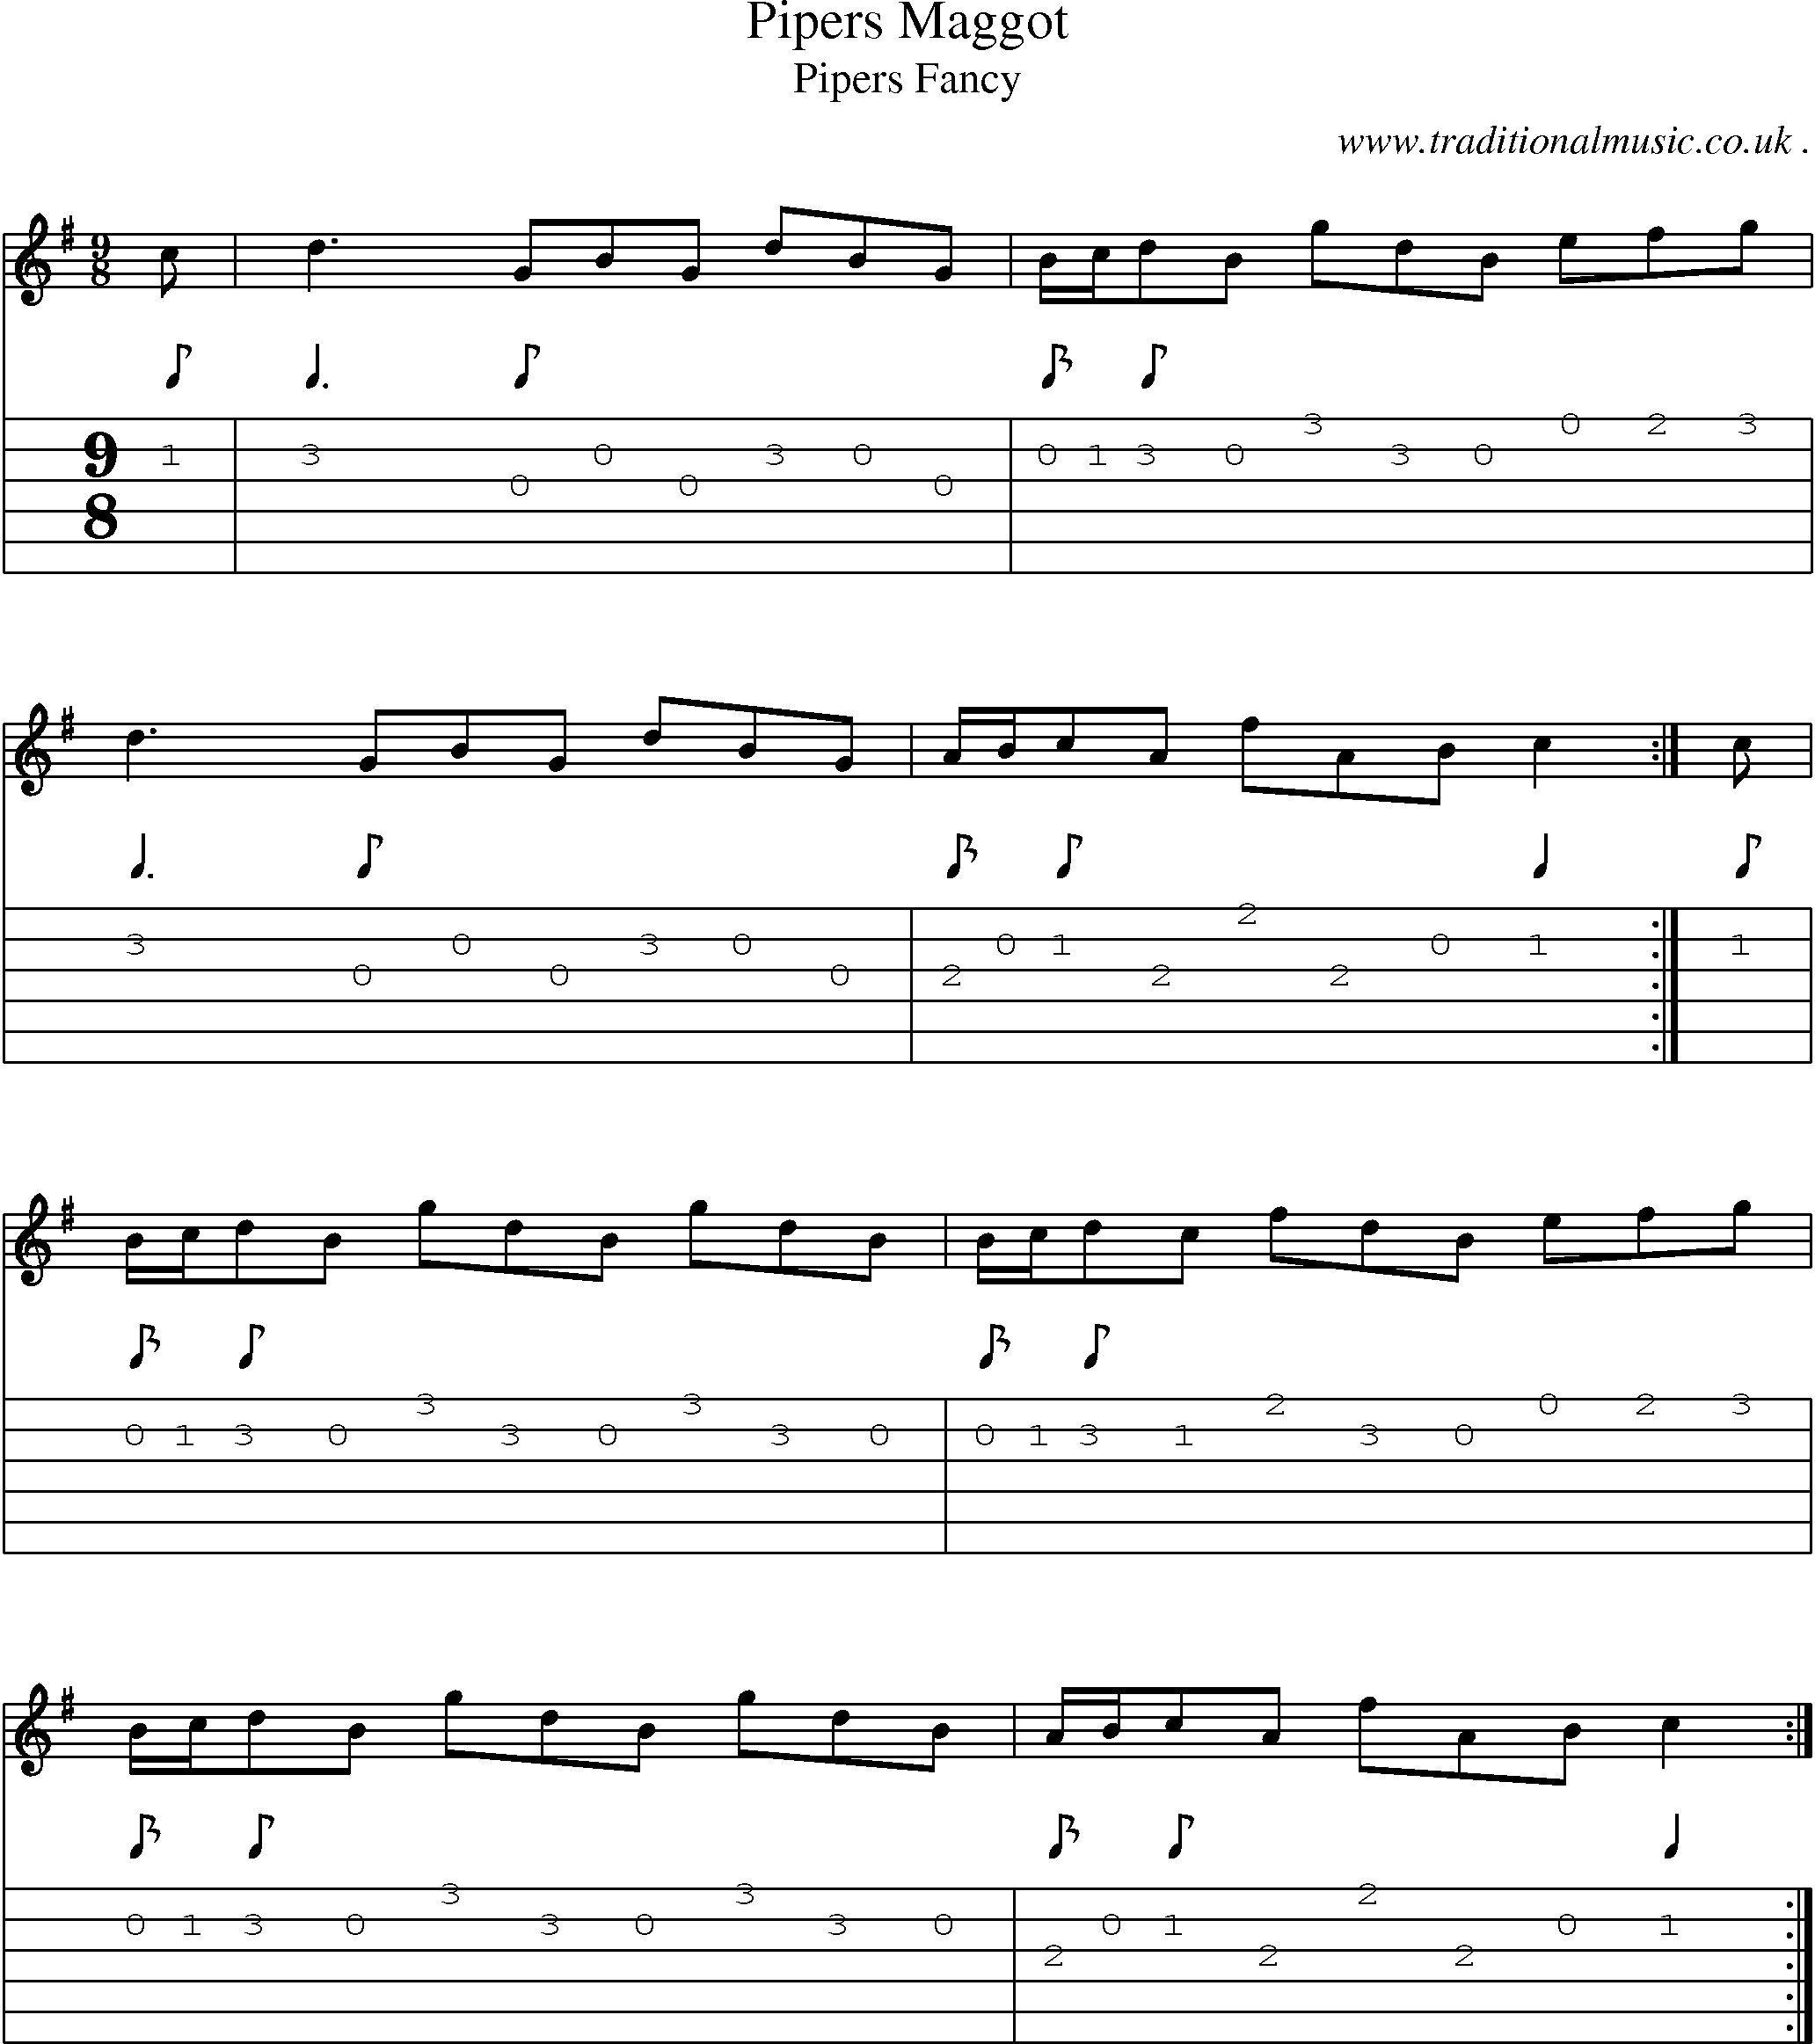 Sheet-Music and Guitar Tabs for Pipers Maggot